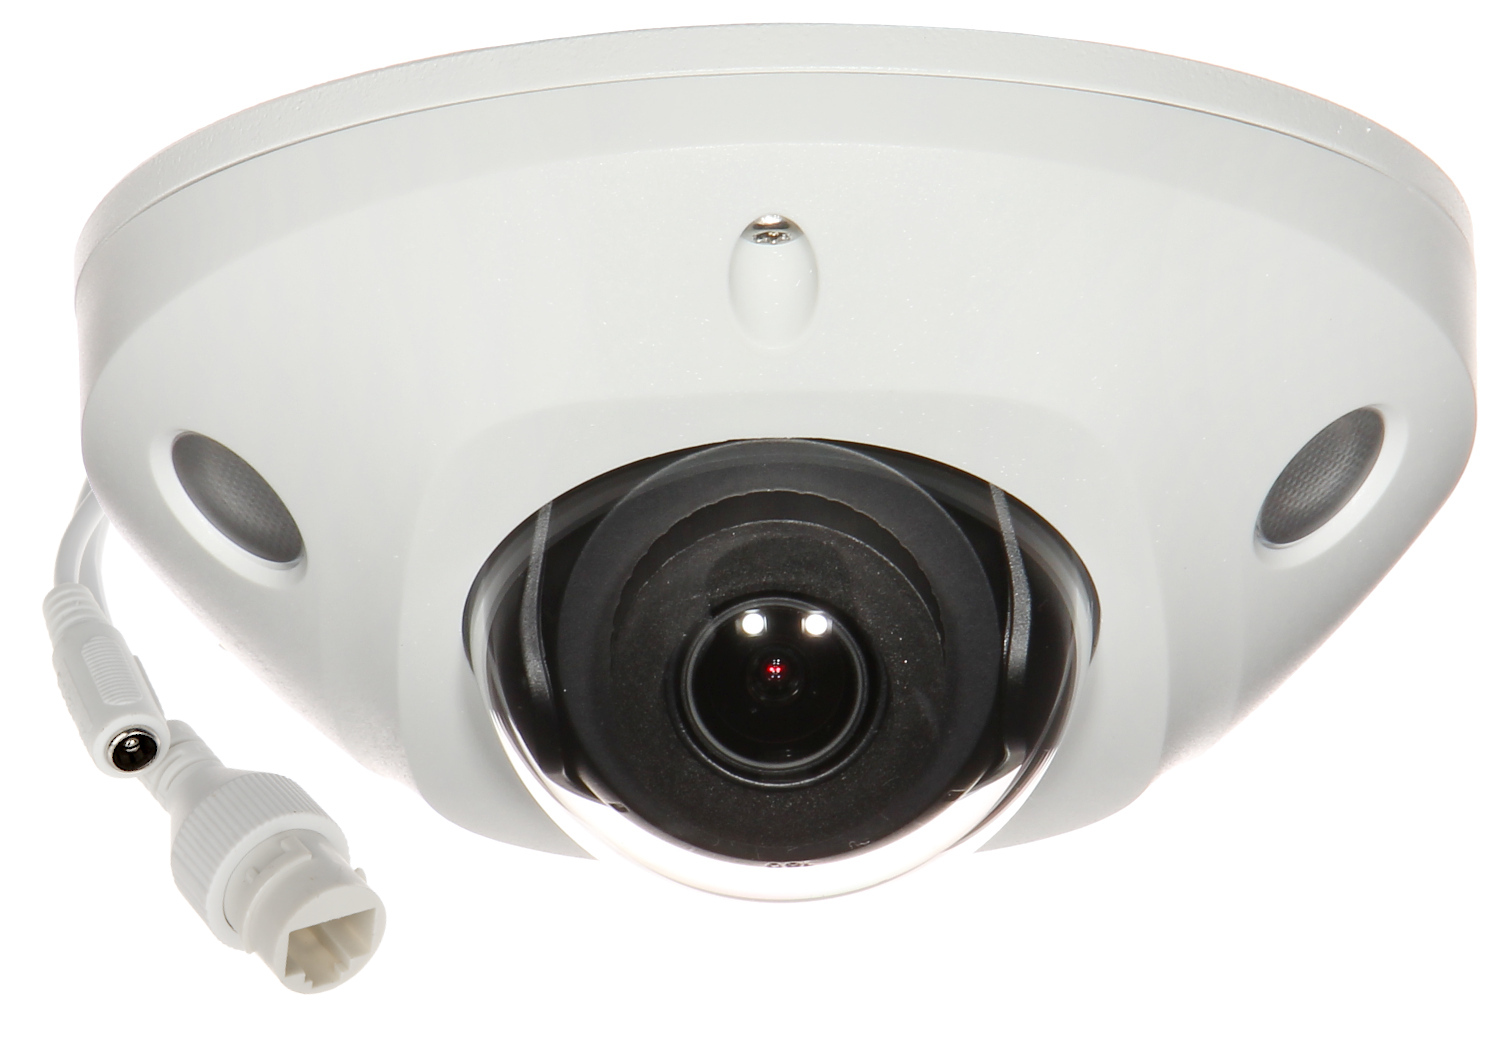 IP VANDALPROOF CAMERA DS-2CD2545FWD-I(2.8mm) - 4 Mpx H... - Dome Cameras  with Fixed-Focal Lens and Infra-Red Illum... - Delta